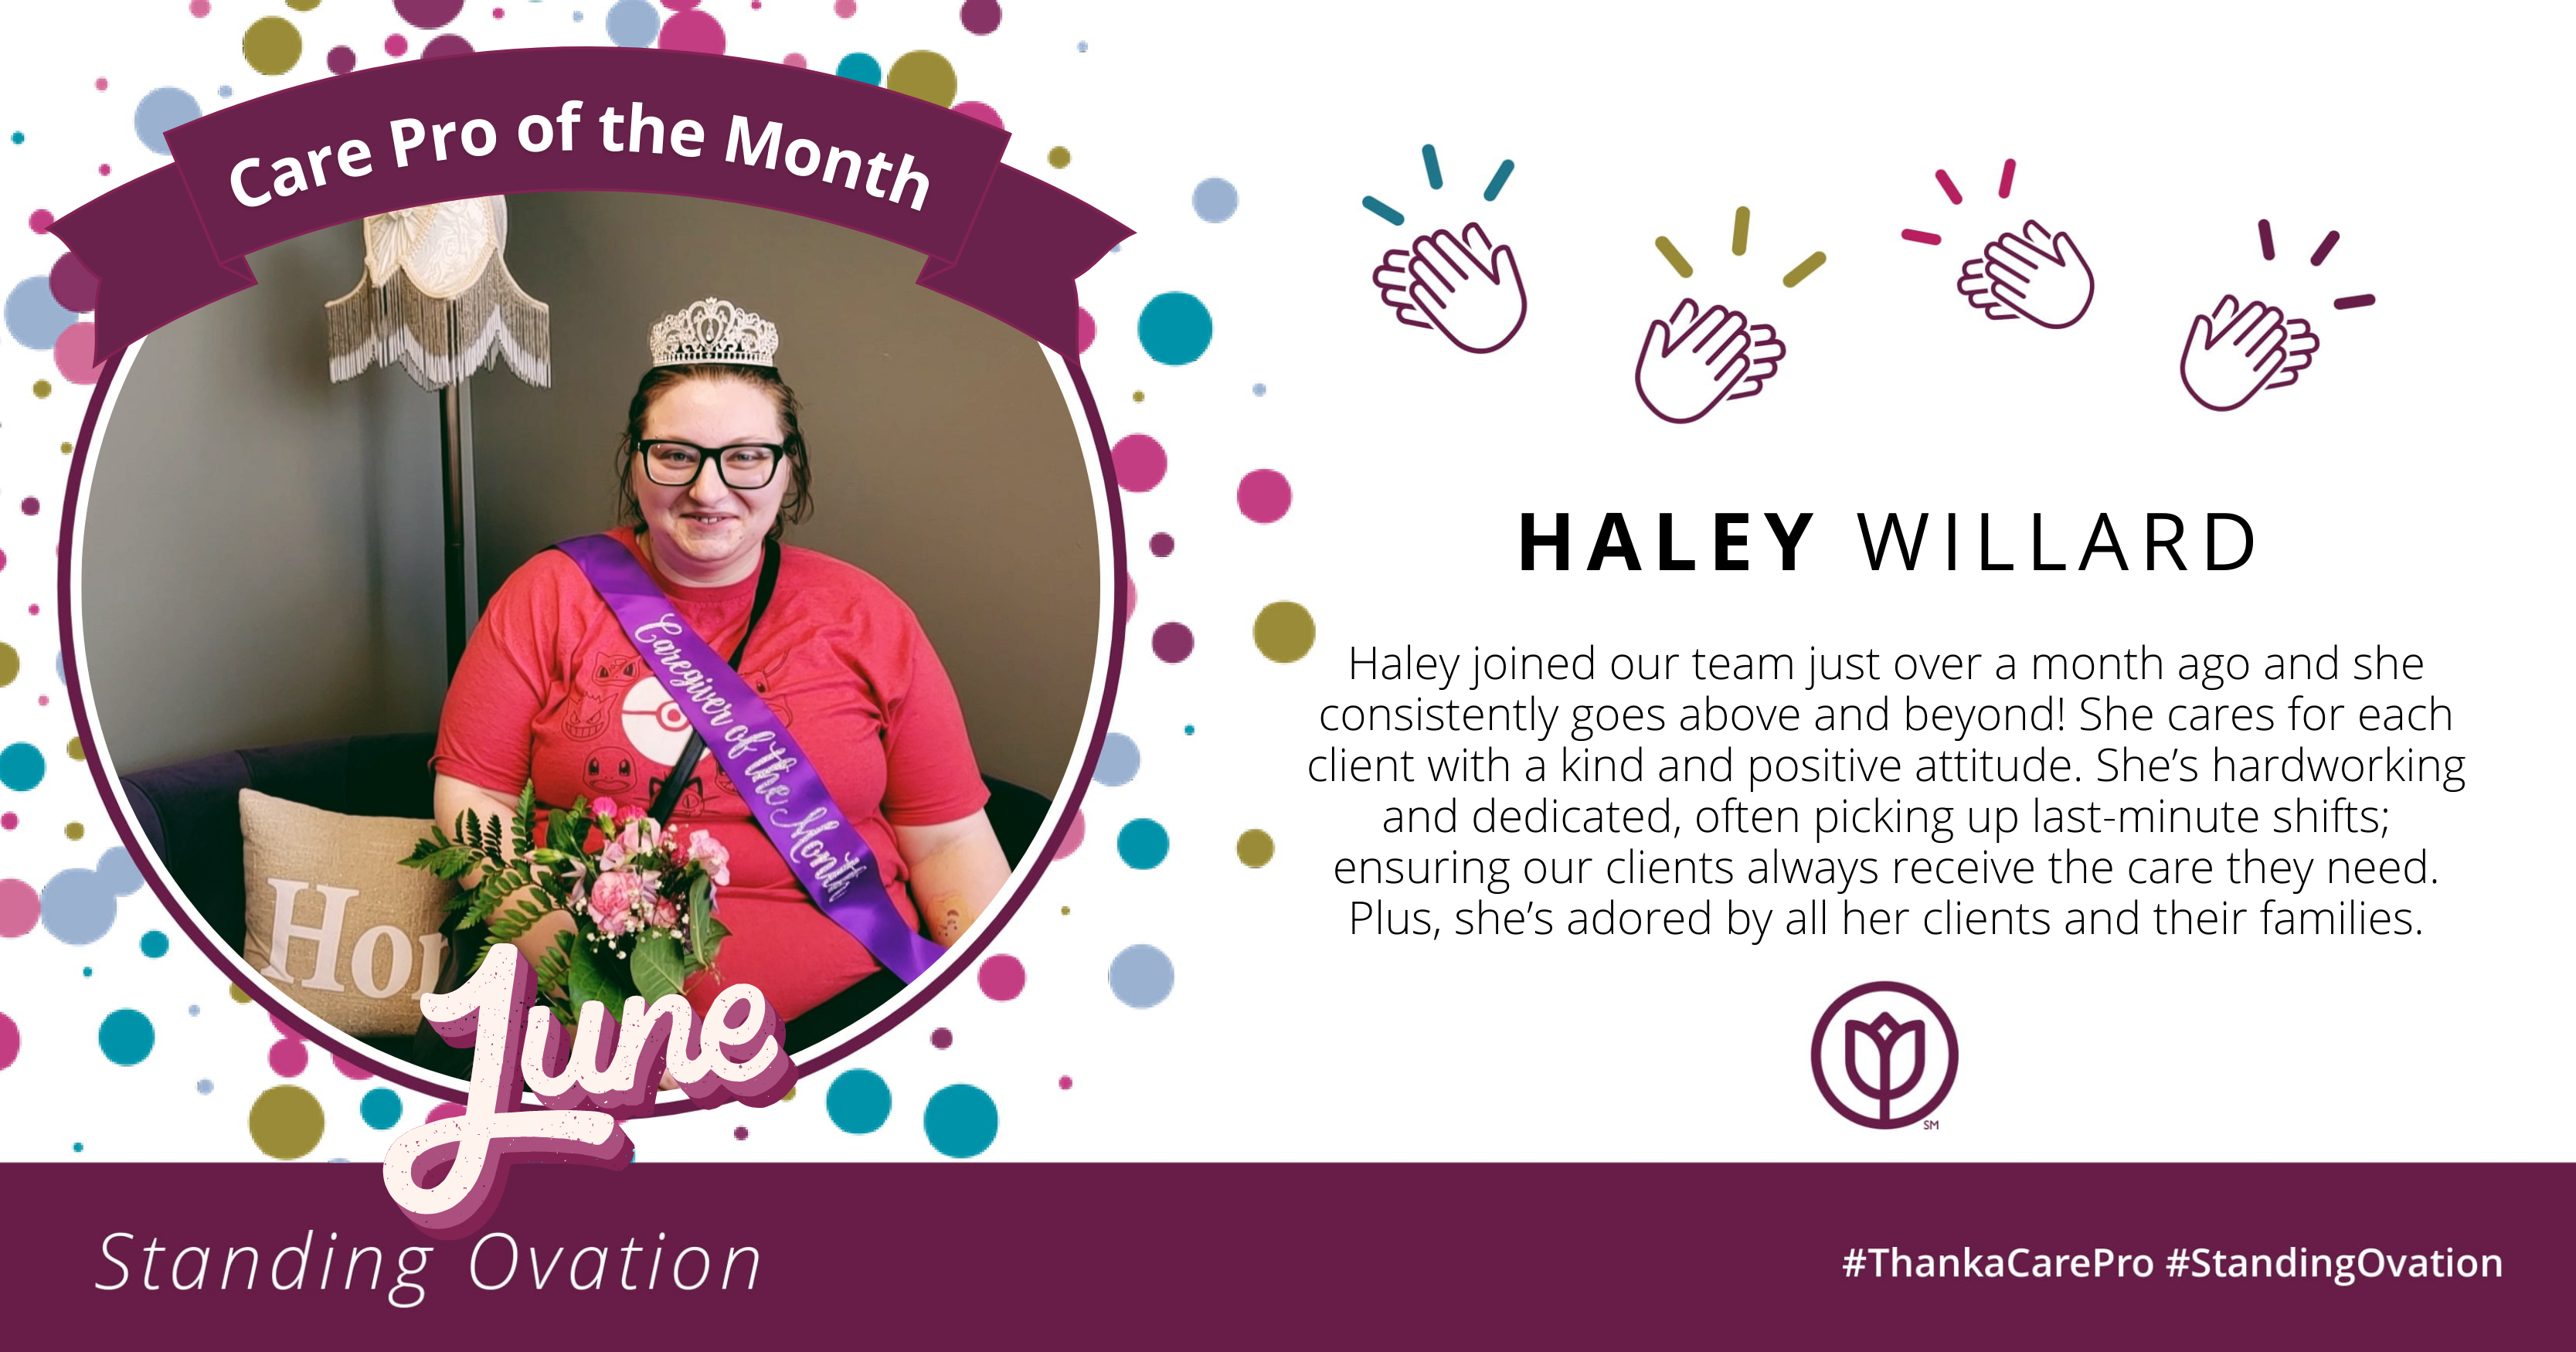 Caregiver Haley - Care Pro of the Month June